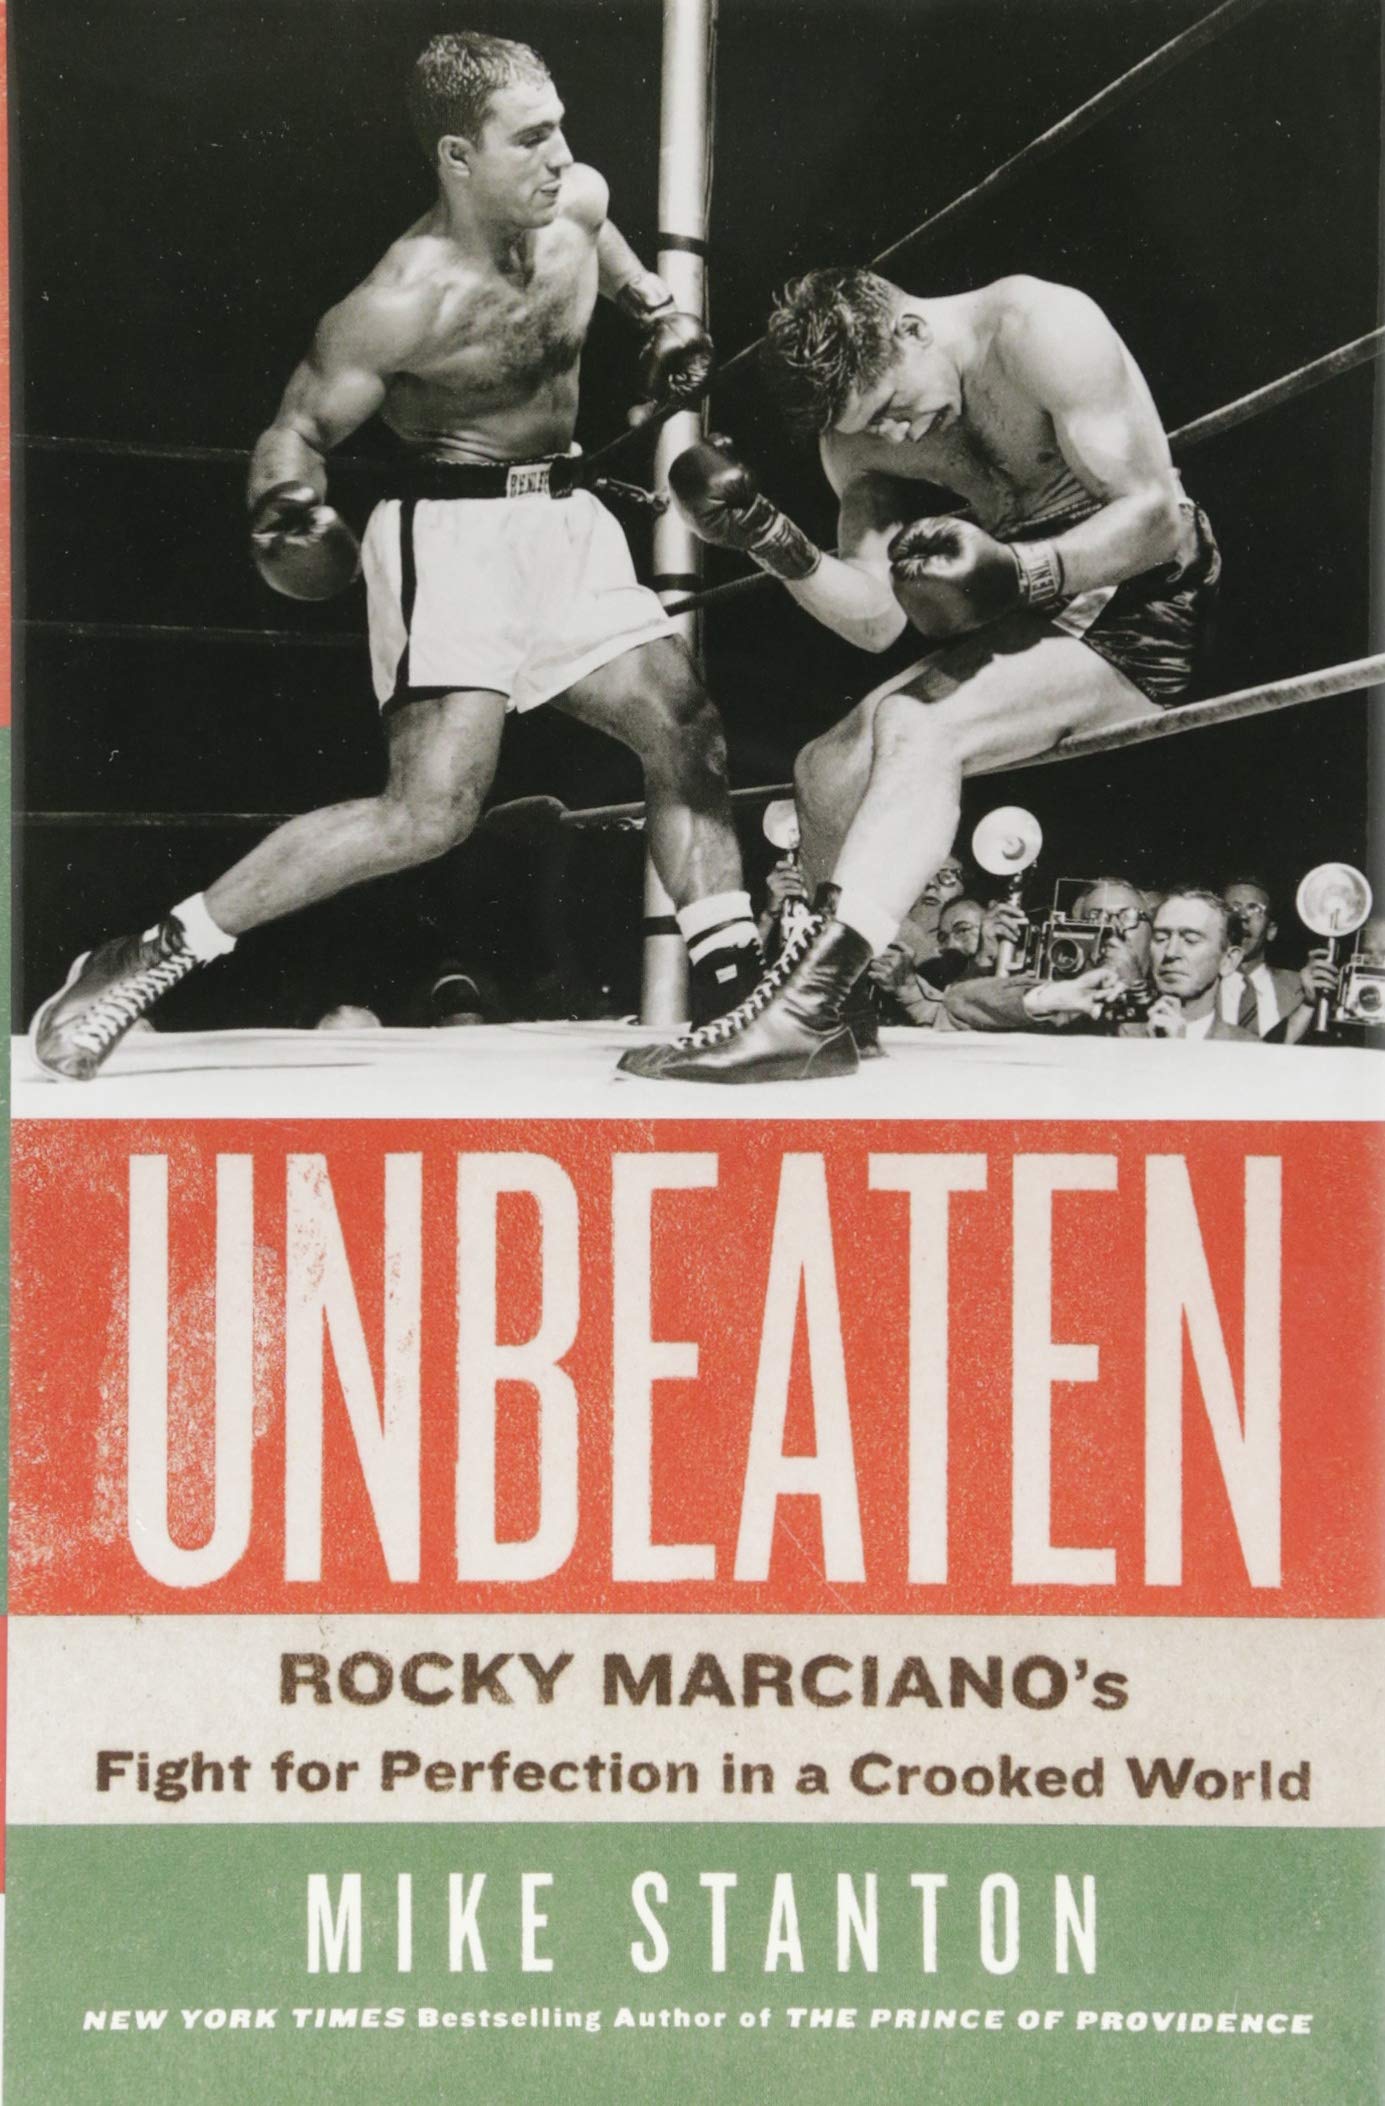 A book cover for Unbeaten: Rocky Marciano’s Fight for Perfection in a Crooked World